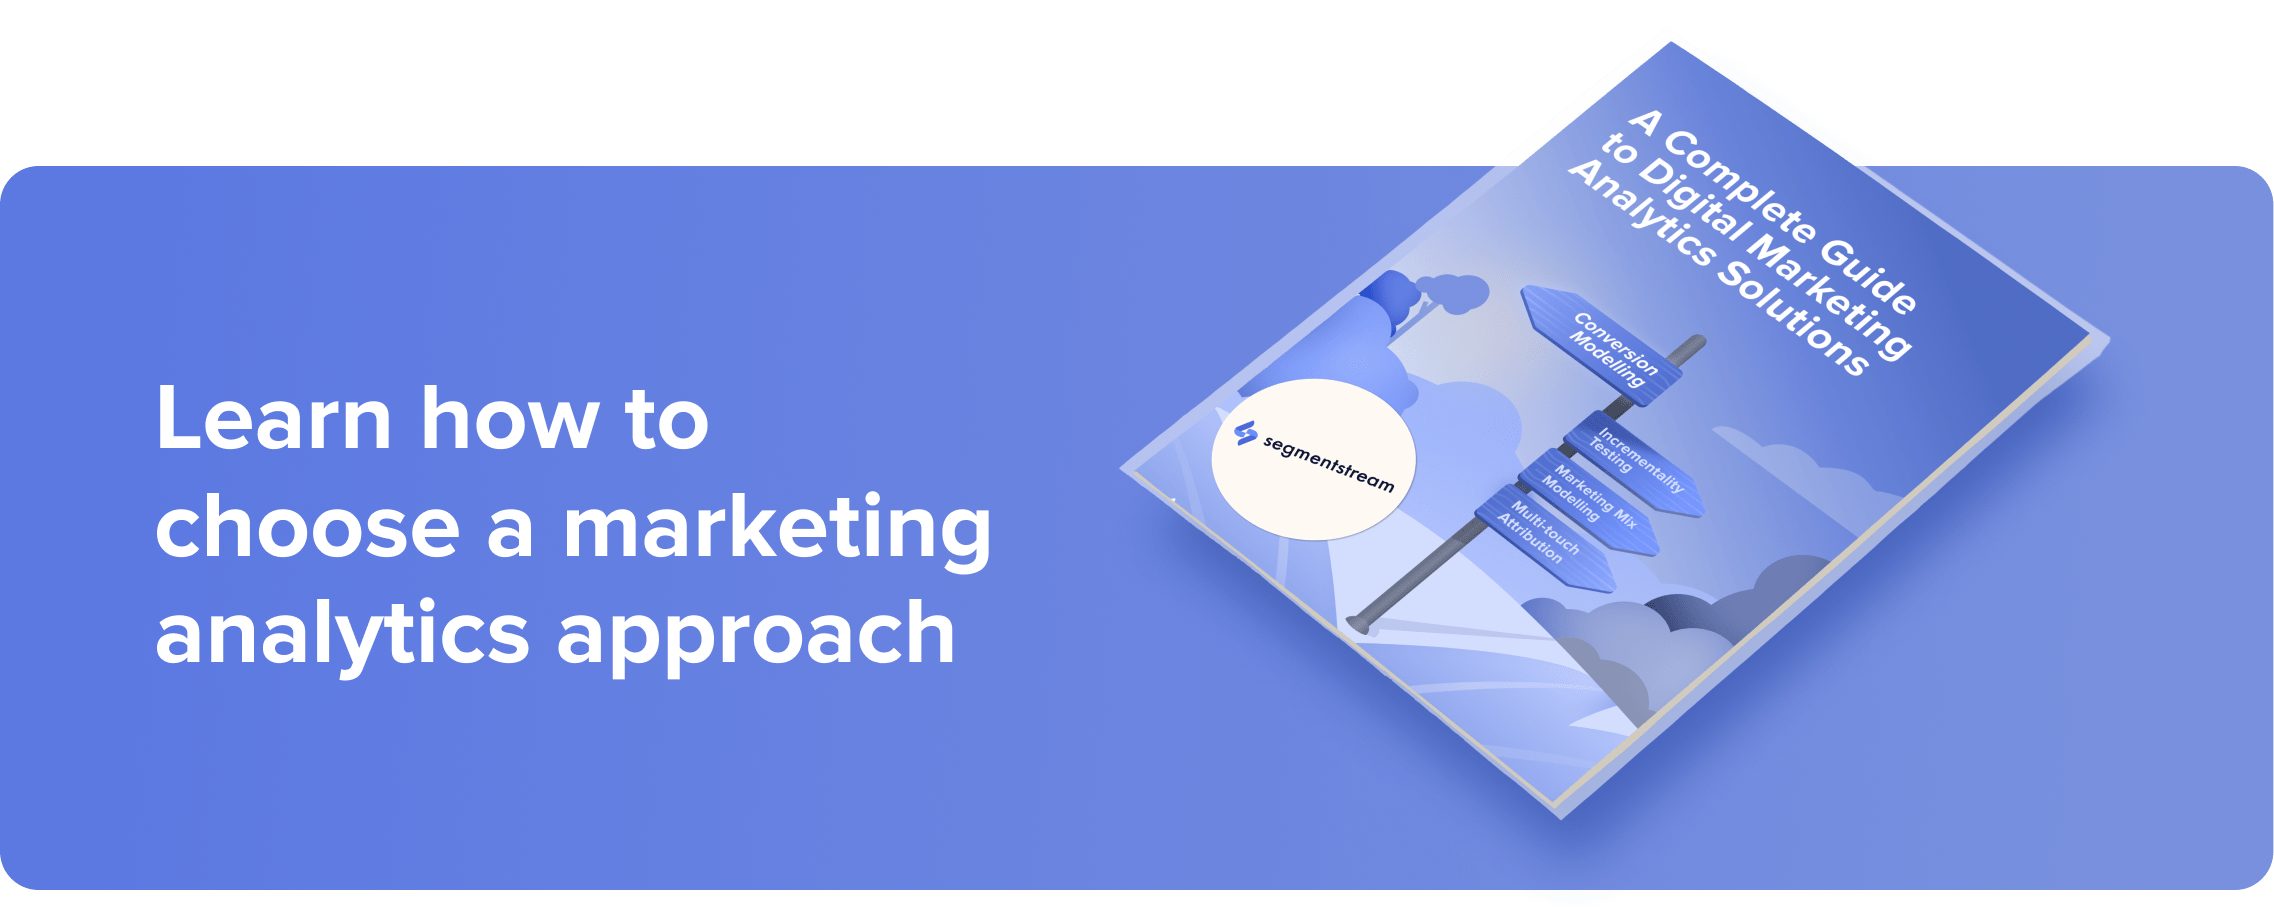 Learn how to choose a marketing analytics approach